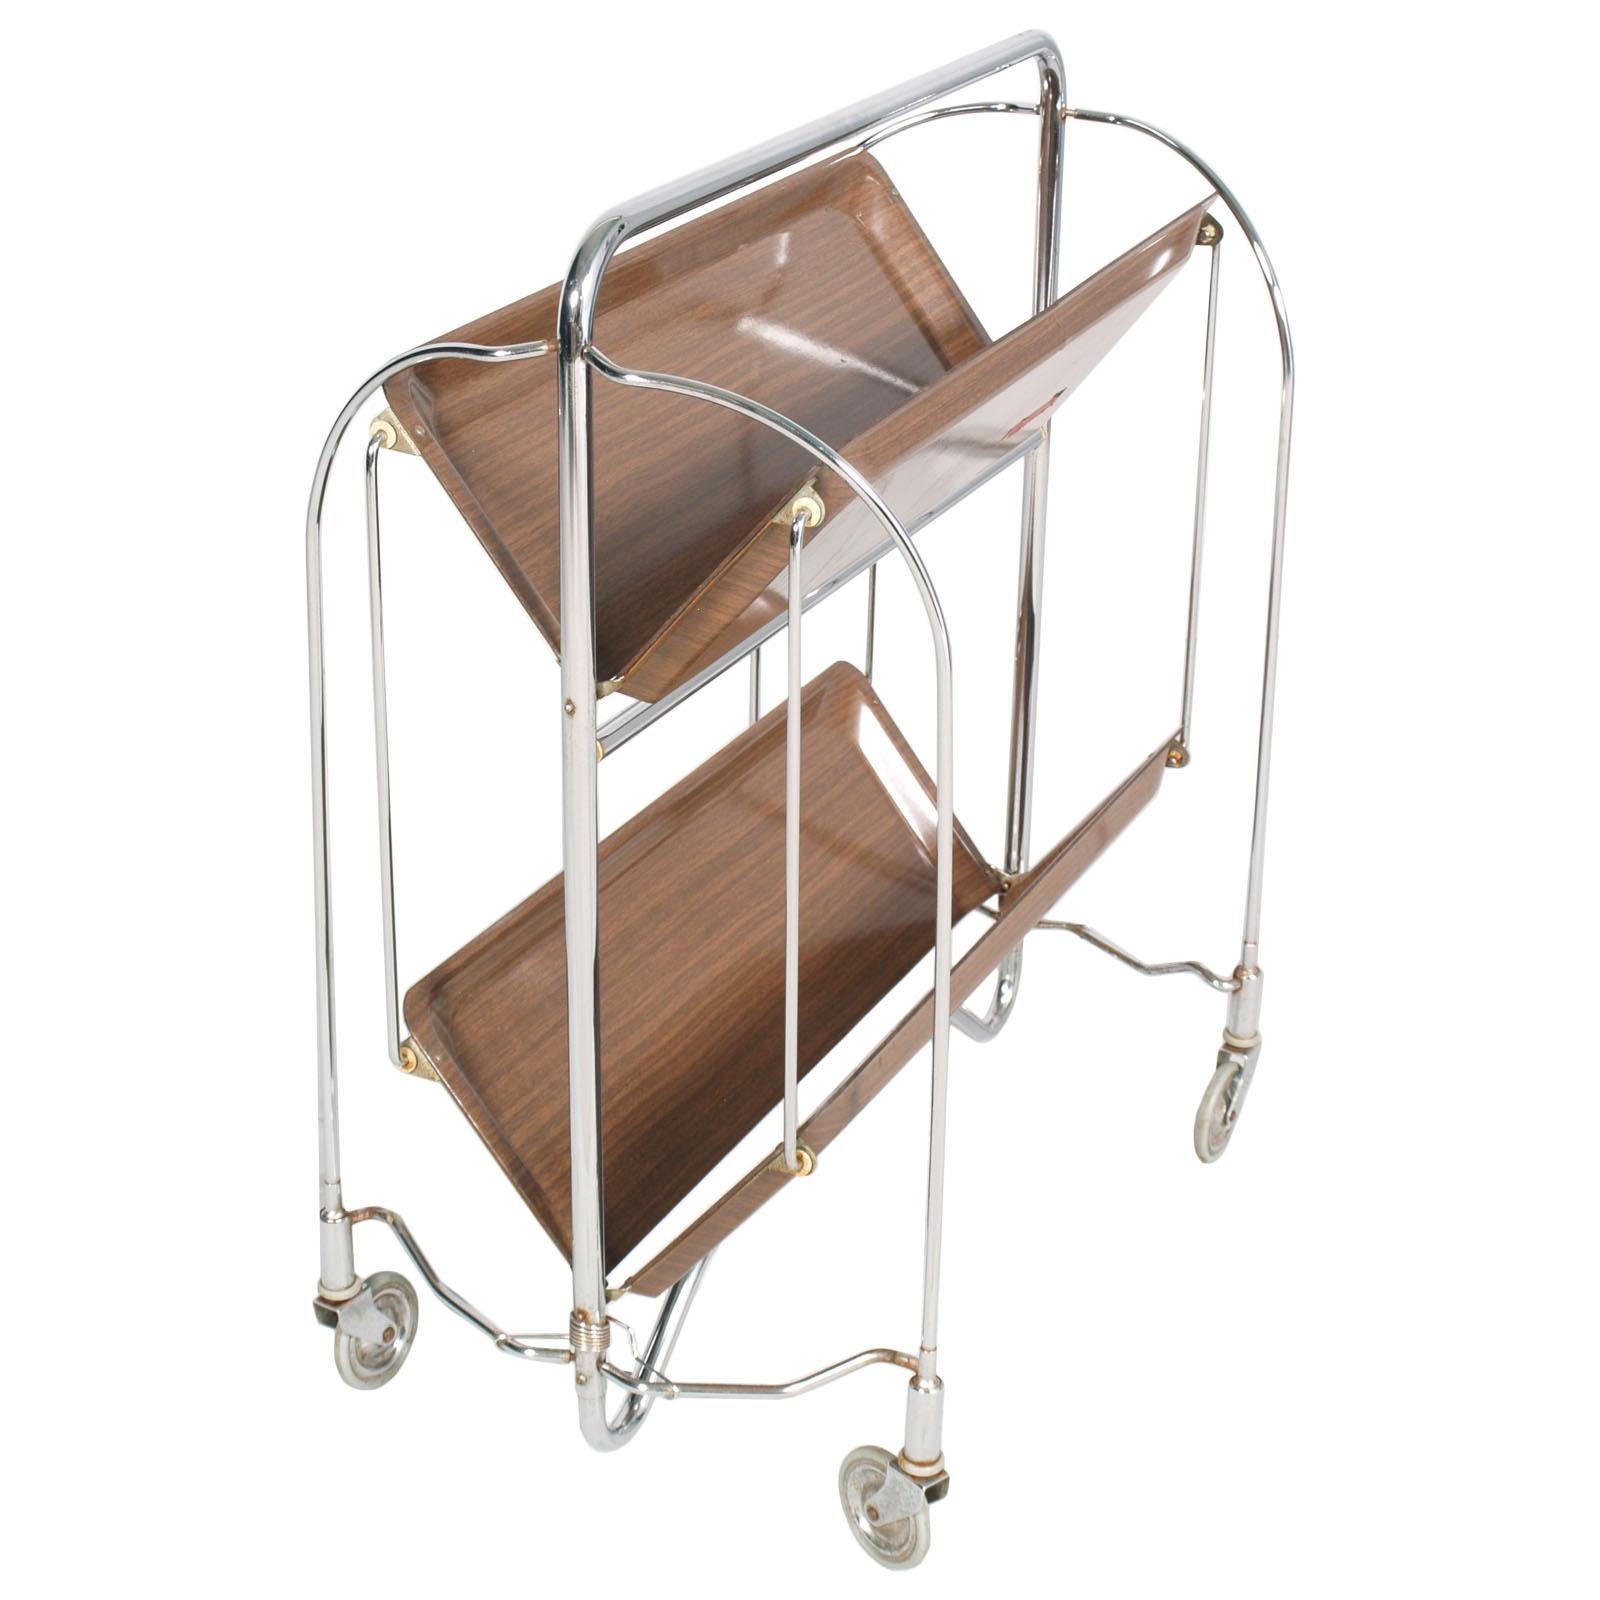 Original vintage bar or serving cart from Germany. Super stylish clean and multifunctional design.
It can be folded and therefore easily stored (great space saver) it can be used as a shelf and as a full serving table on wheels. Versatile stylish